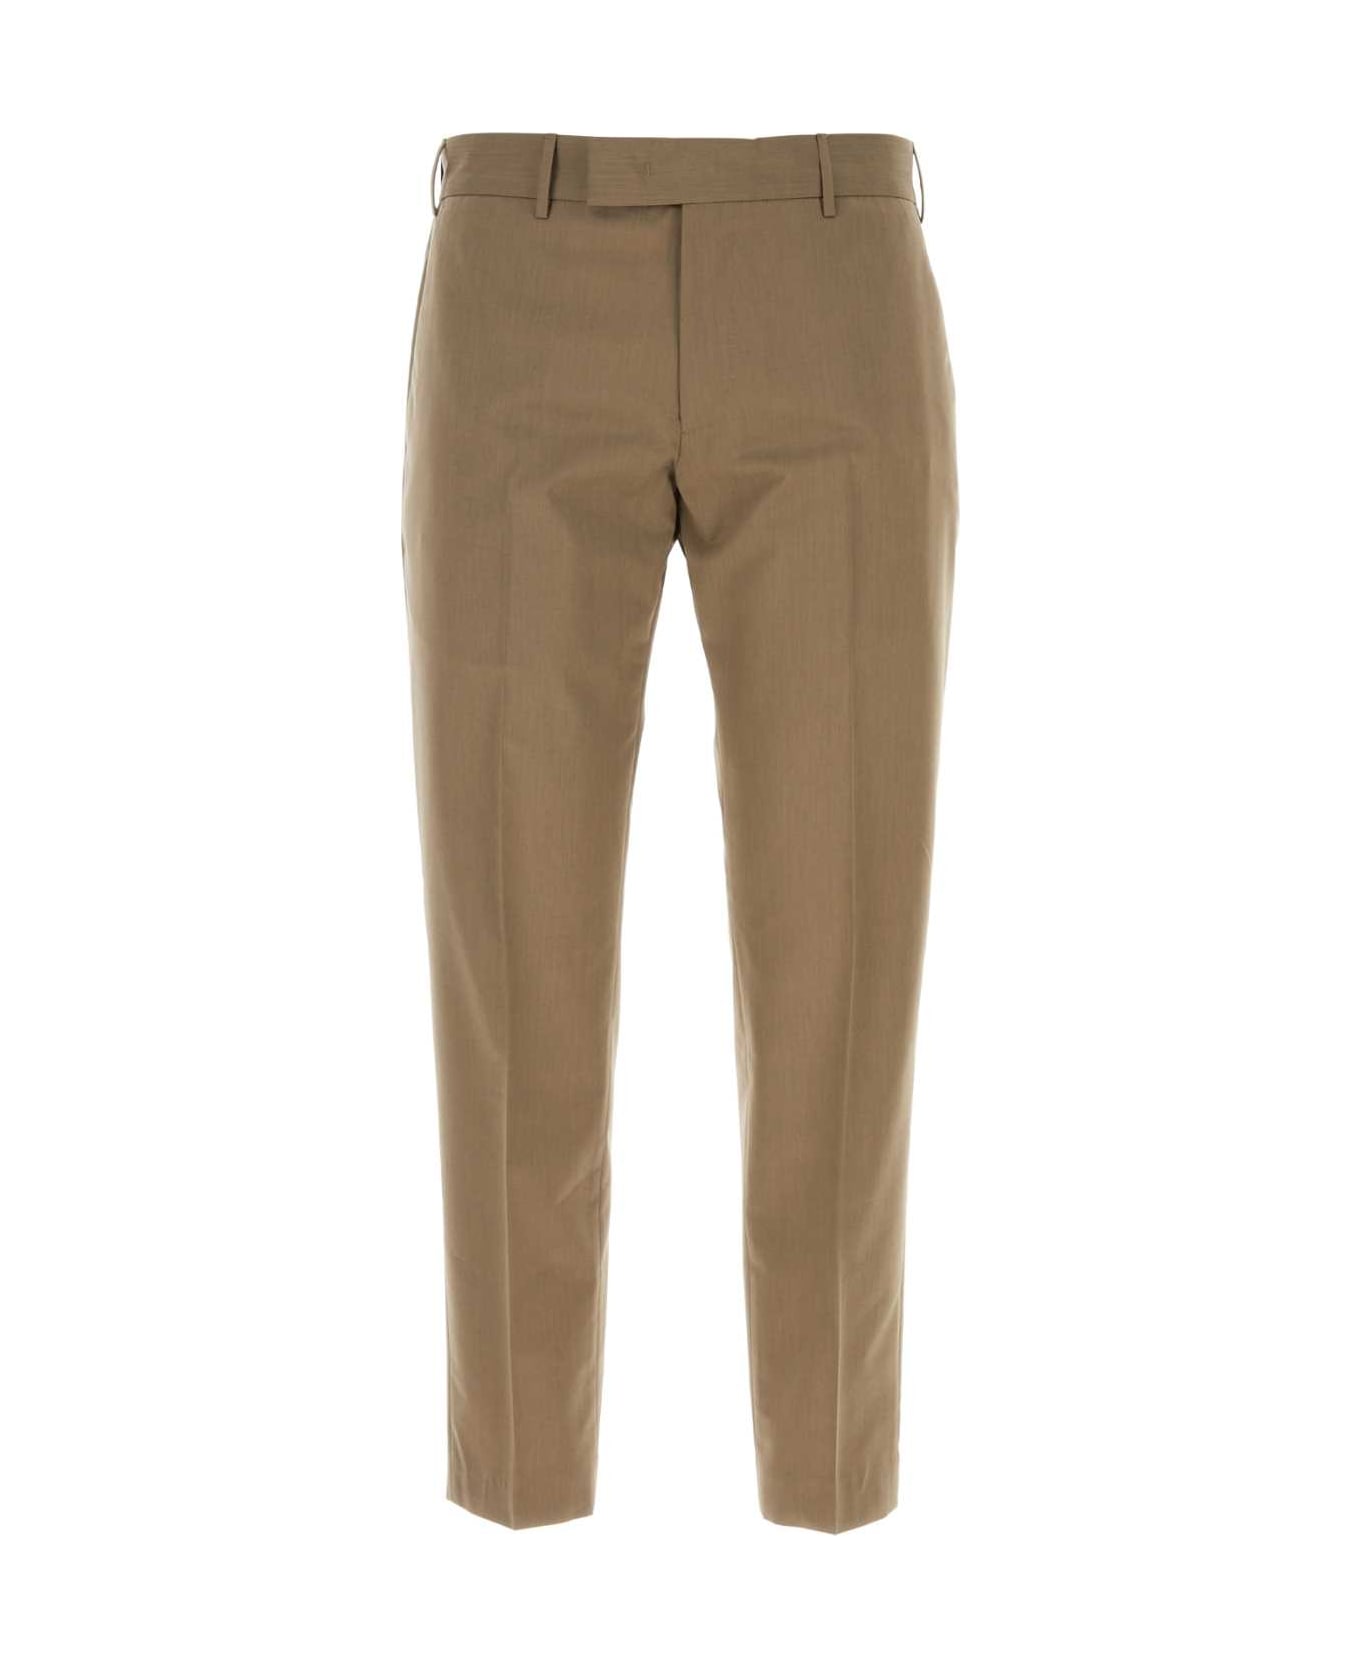 PT01 Cappuccino Stretch Cotton Pant - BEIGE ボトムス